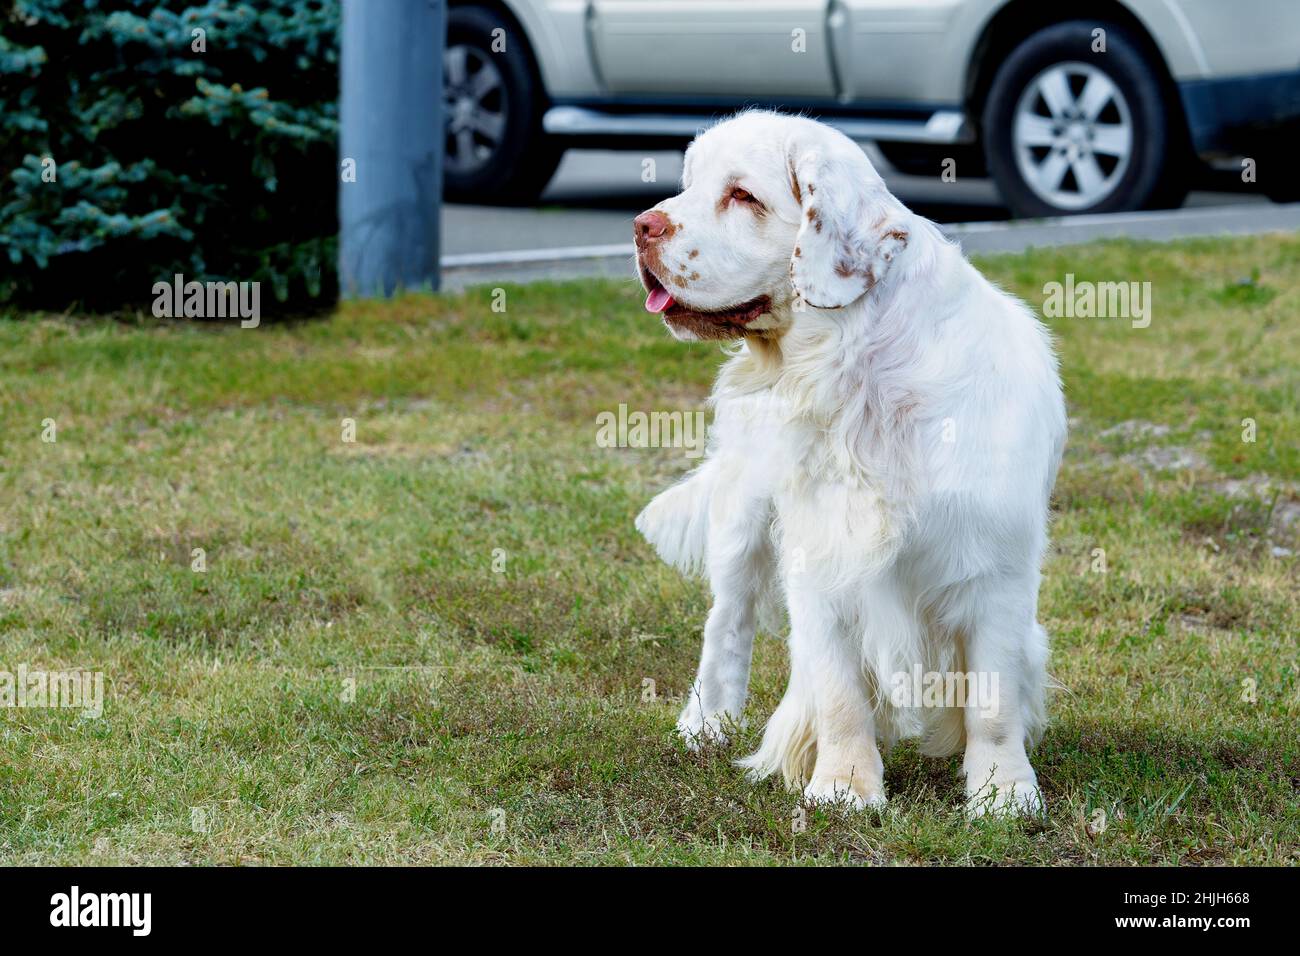 Clumber Spaniel looks aside. The Clumber Spaniel stands on the grass in the park. Stock Photo